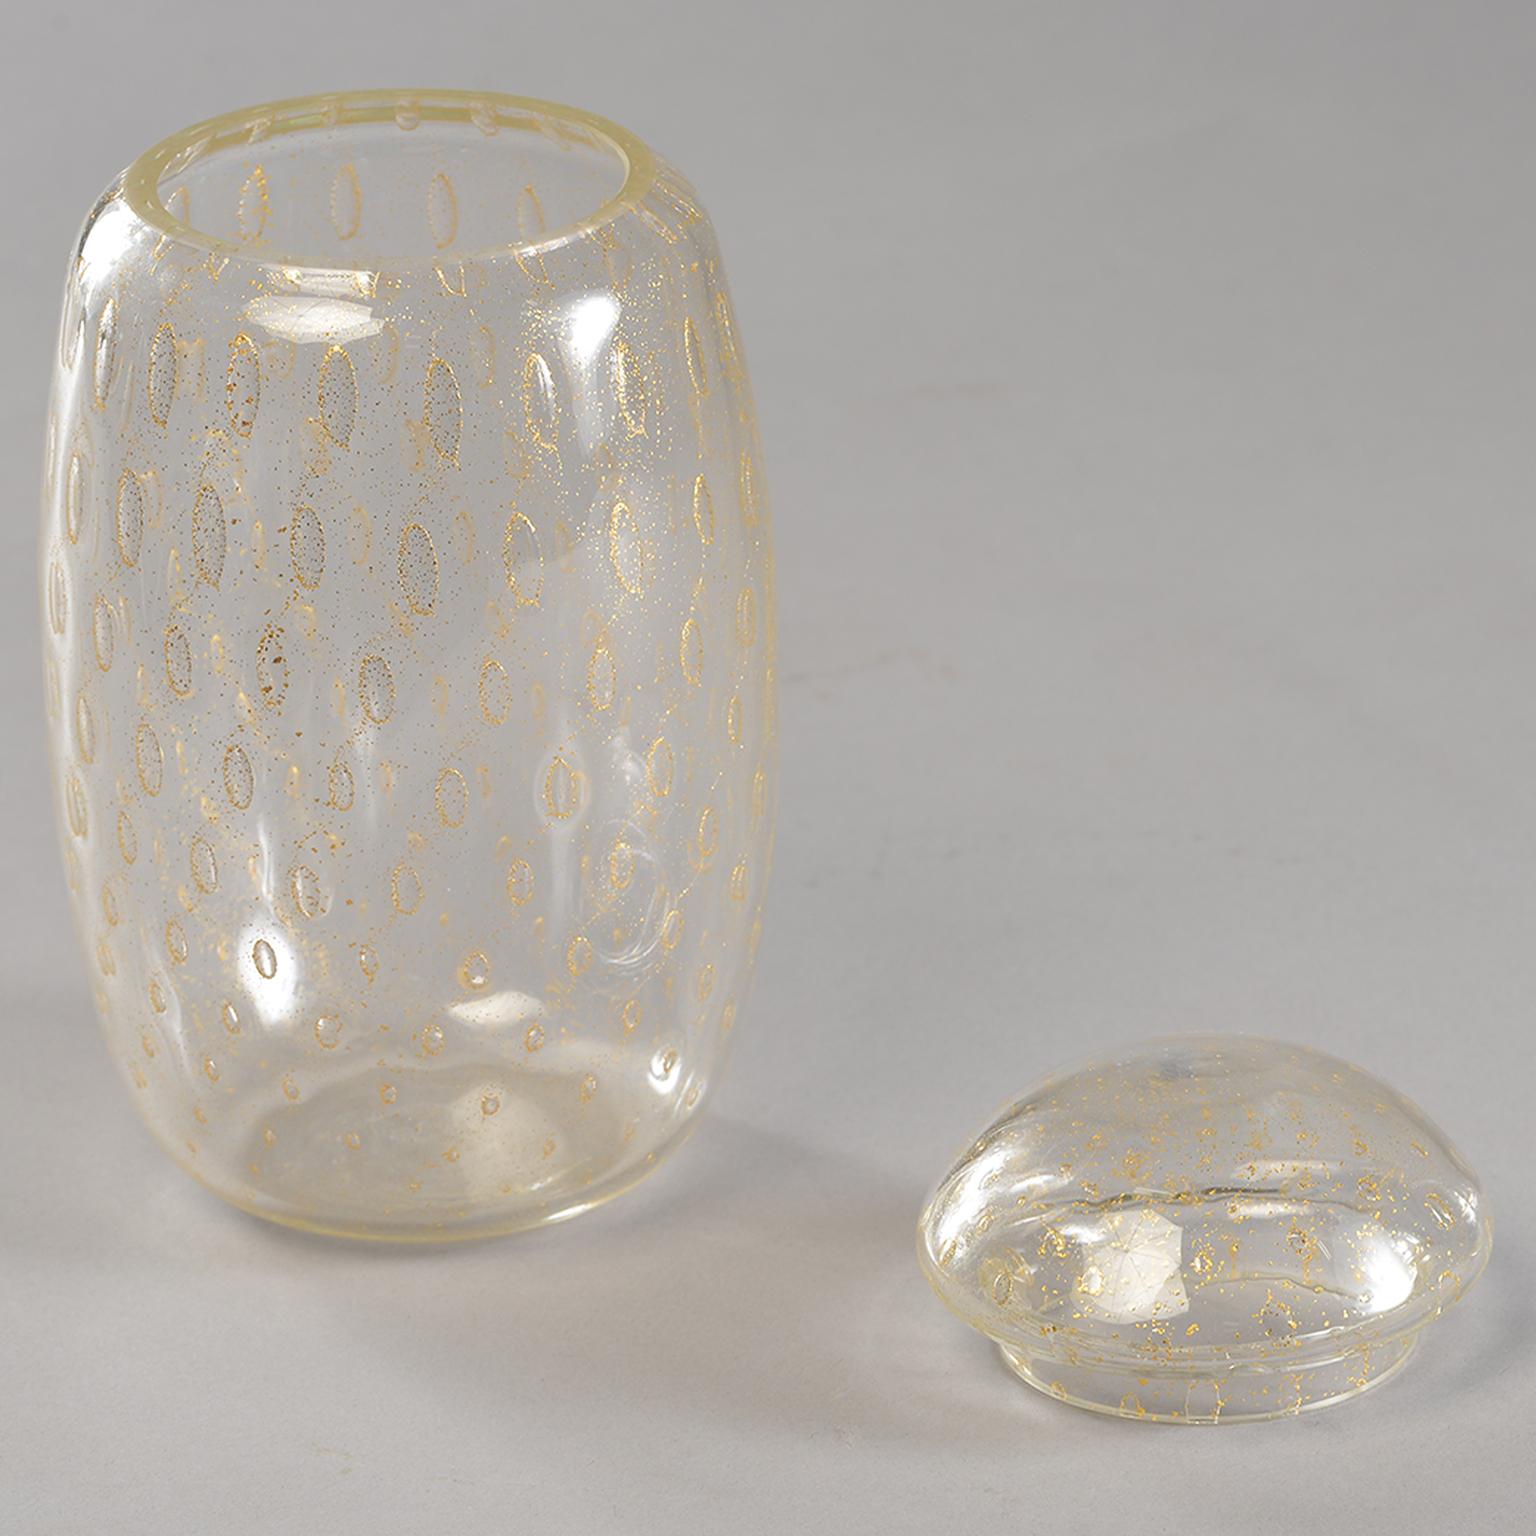 Clear Murano glass vessel has gold inclusions and a lid, circa 1950s. Other similar vessels in other sizes and shapes available at the time of the this posting.